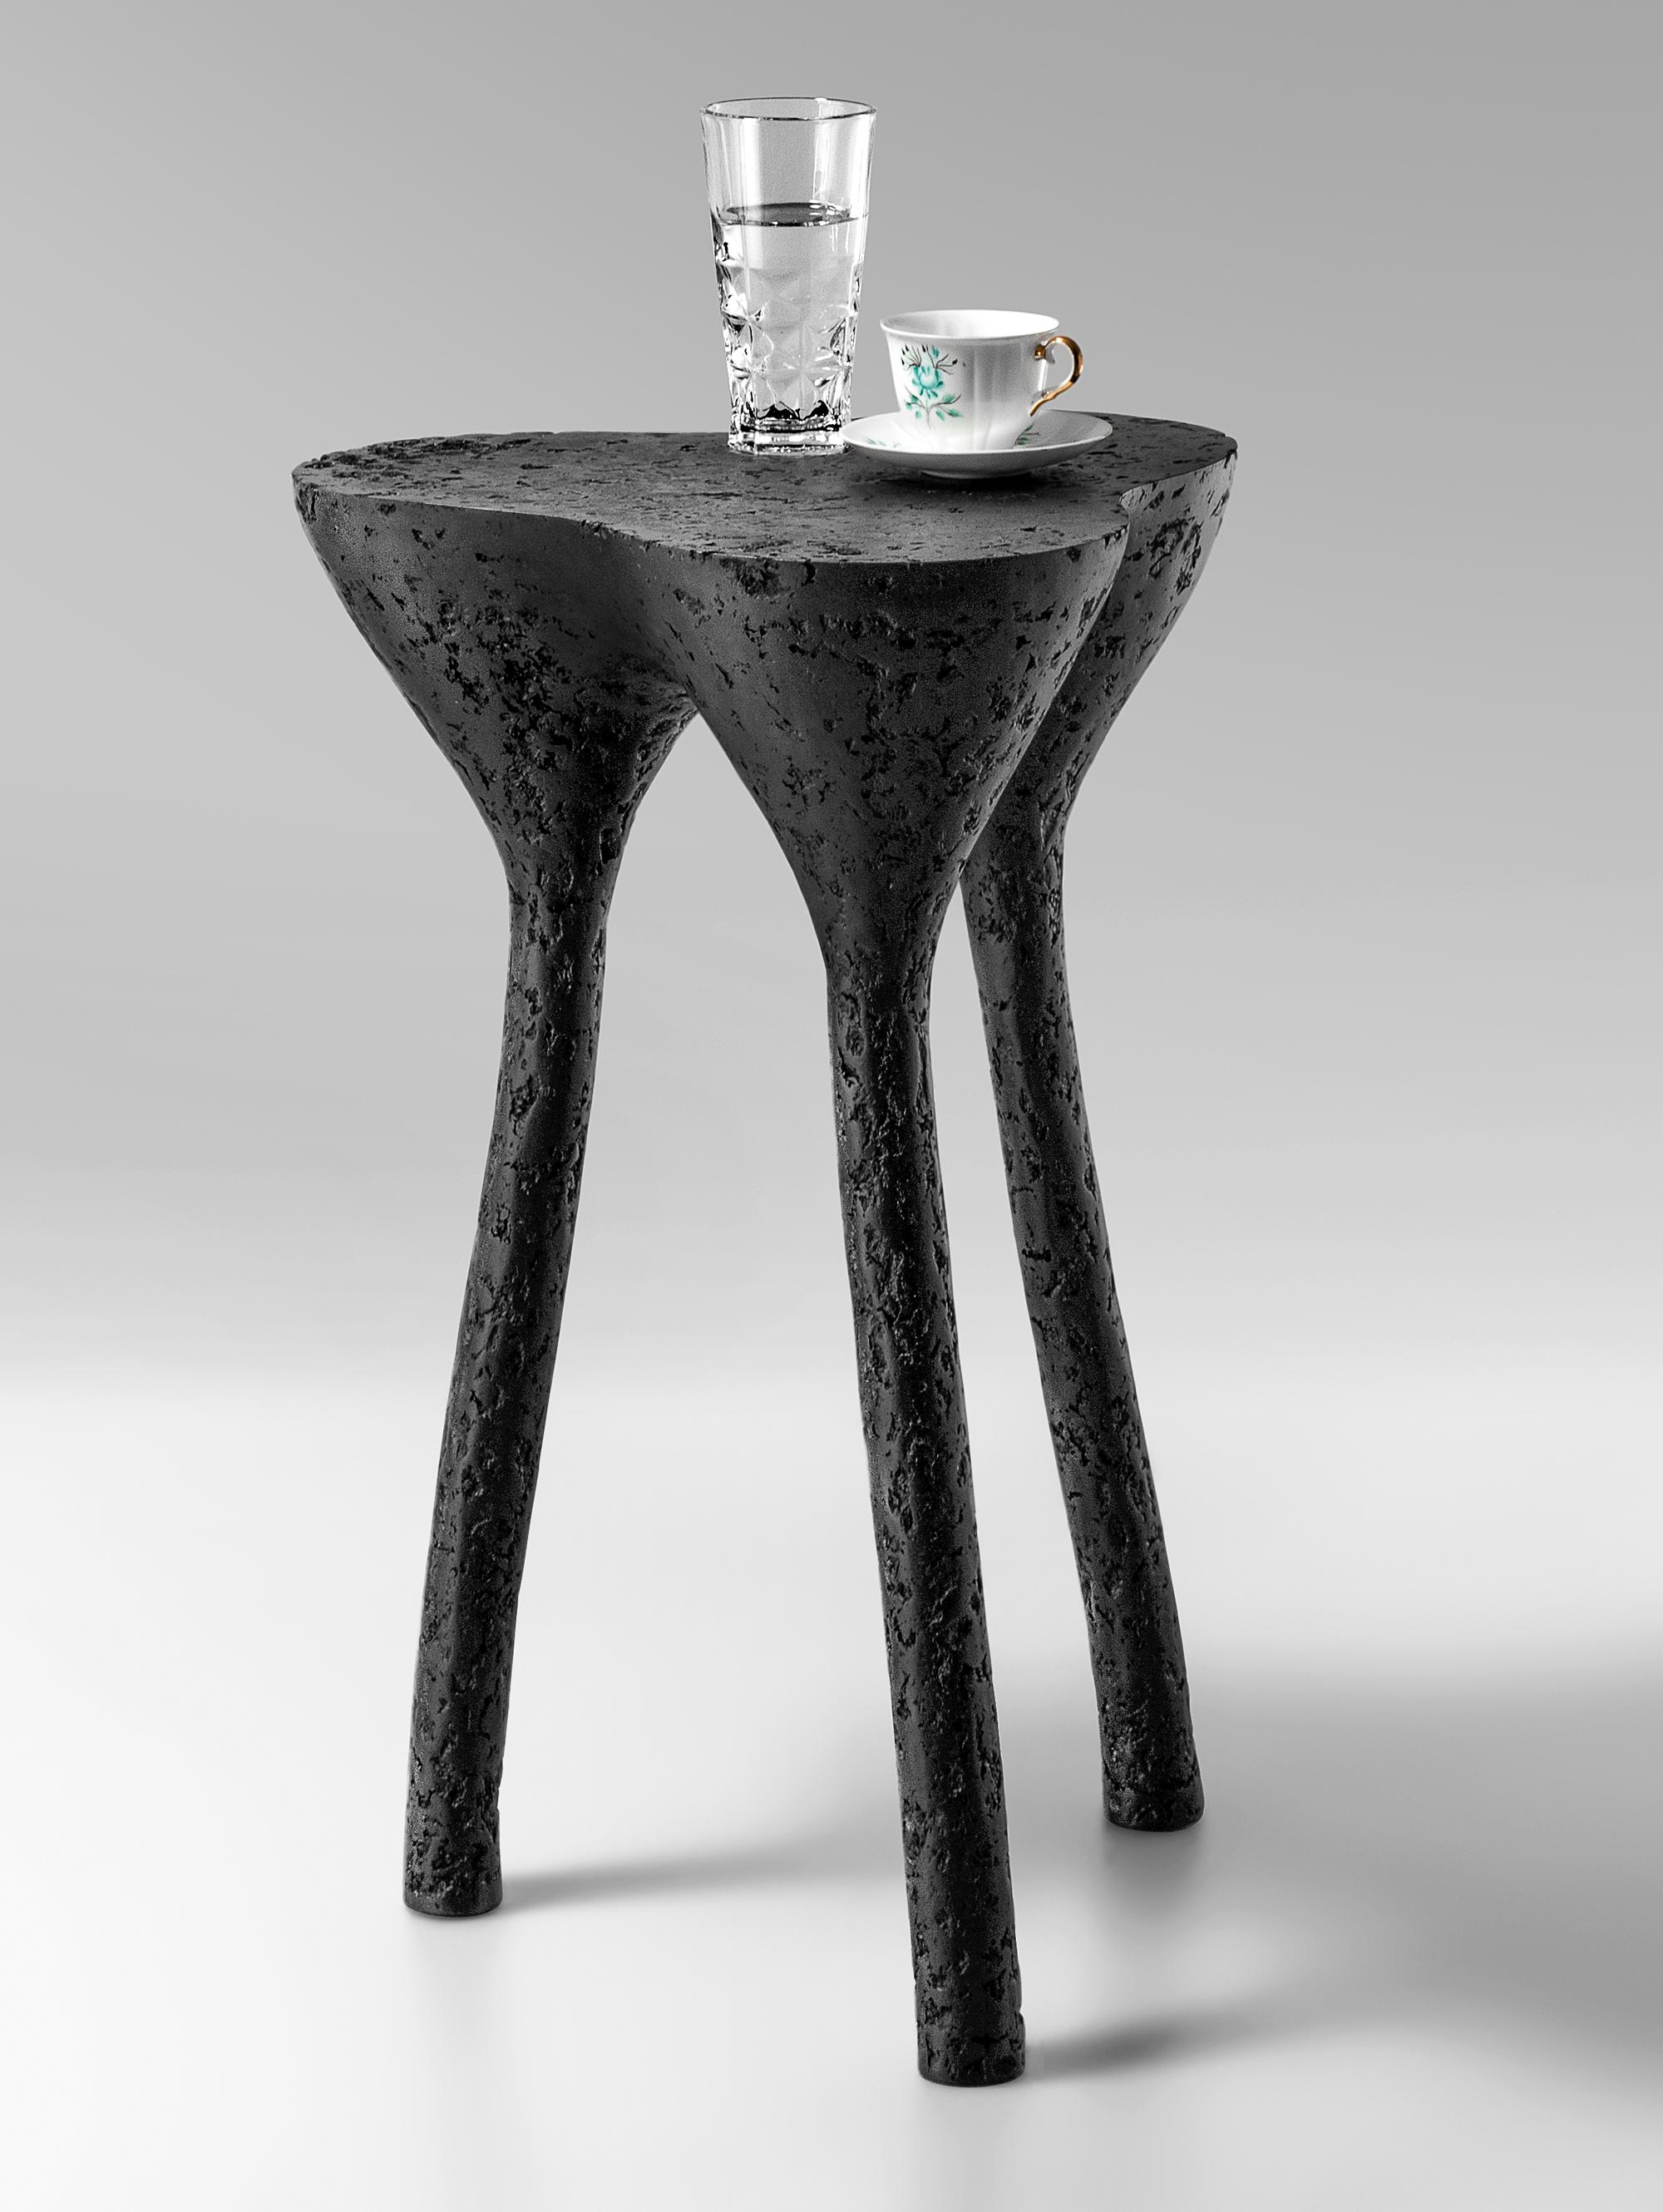 Black Tripod Side Table by Kasanai
Dimensions: D 38 x H 65 cm.
Materials: Cement, wood, recycled paper, glue, paint.
6 kg.

The fusion of sturdiness and elegance, along with the blend of archaism and modernity. More than just a surface for placing